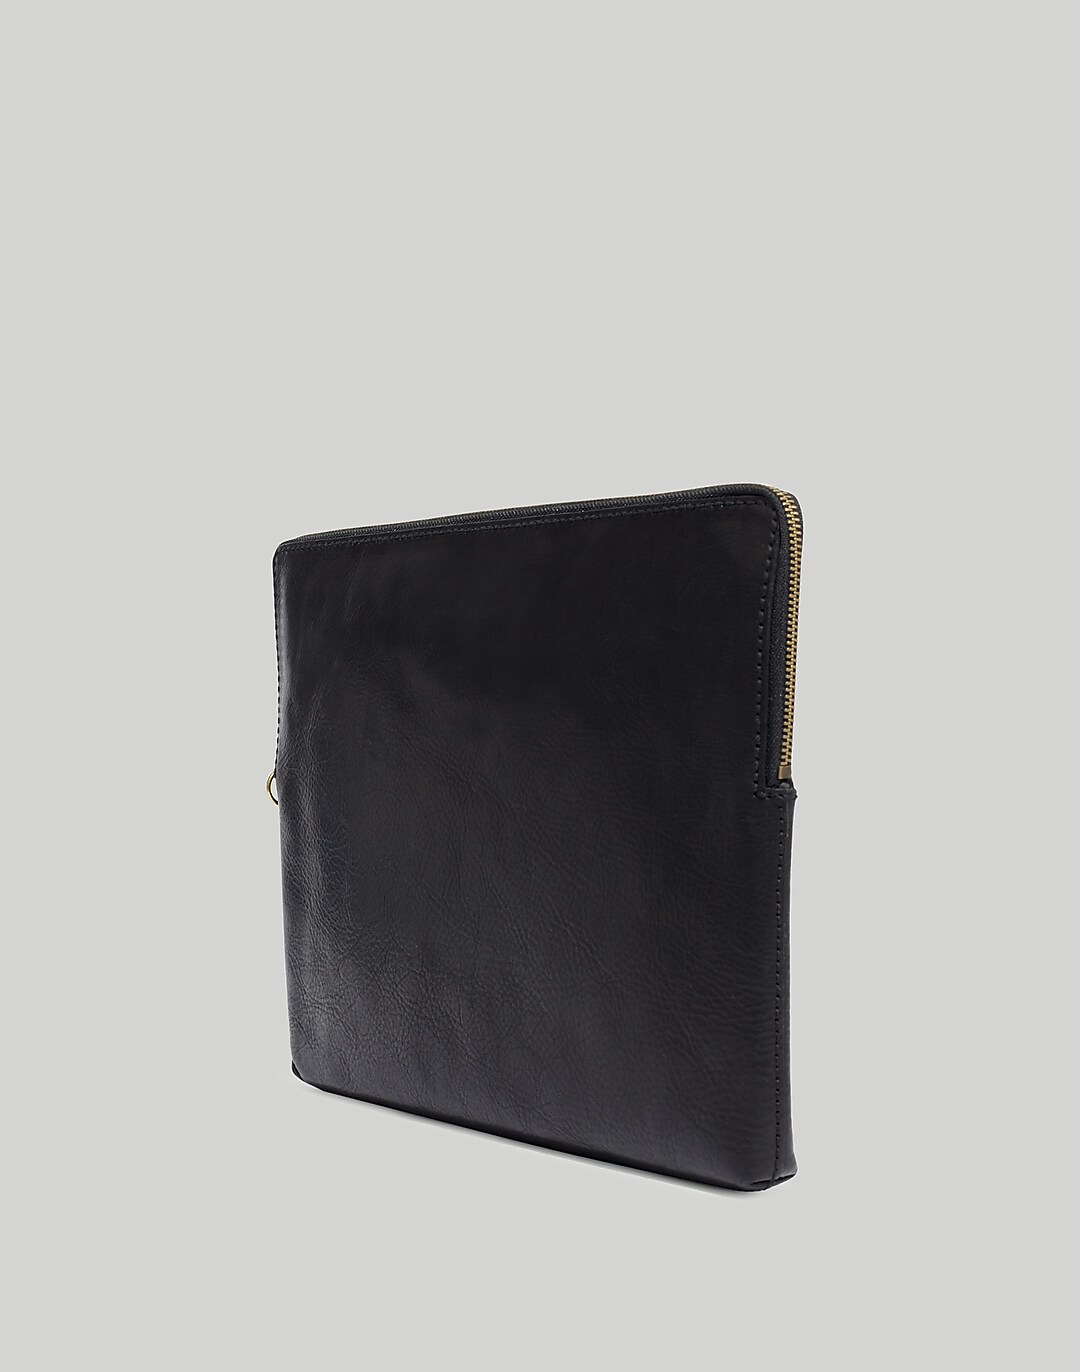 Very Merry - Leather Laptop Sleeve